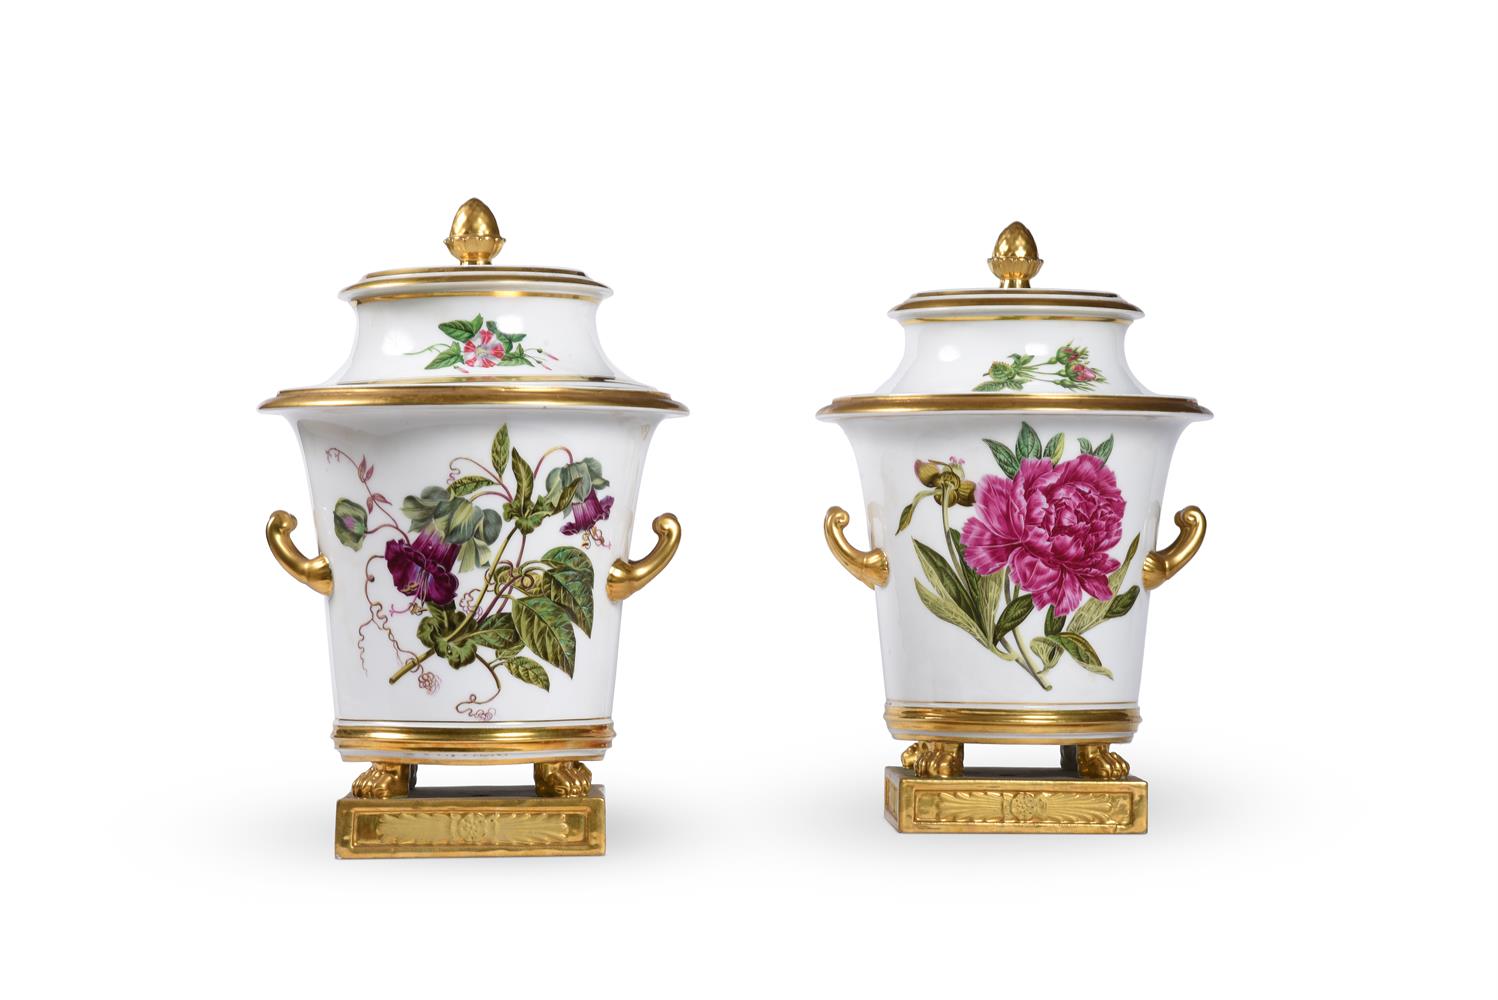 A PAIR OF PARIS PORCELAIN (DARTES FRERES) BOTANICAL TWO-HANDLED ICE-PAILS, LINERS AND COVERS - Image 4 of 6